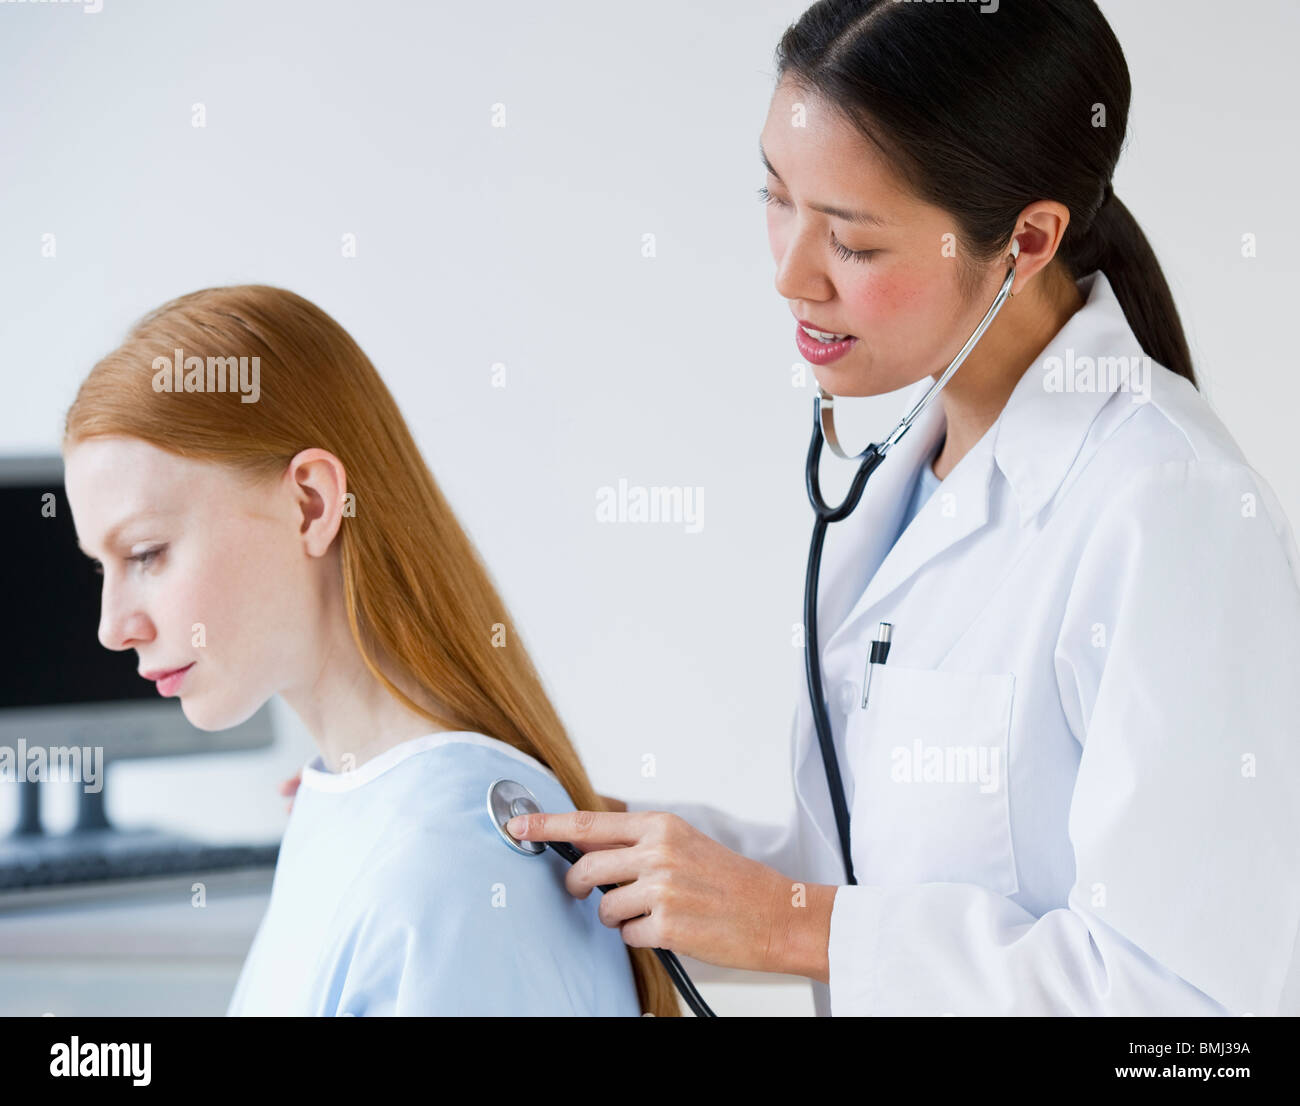 Doctor and patient at checkup Stock Photo